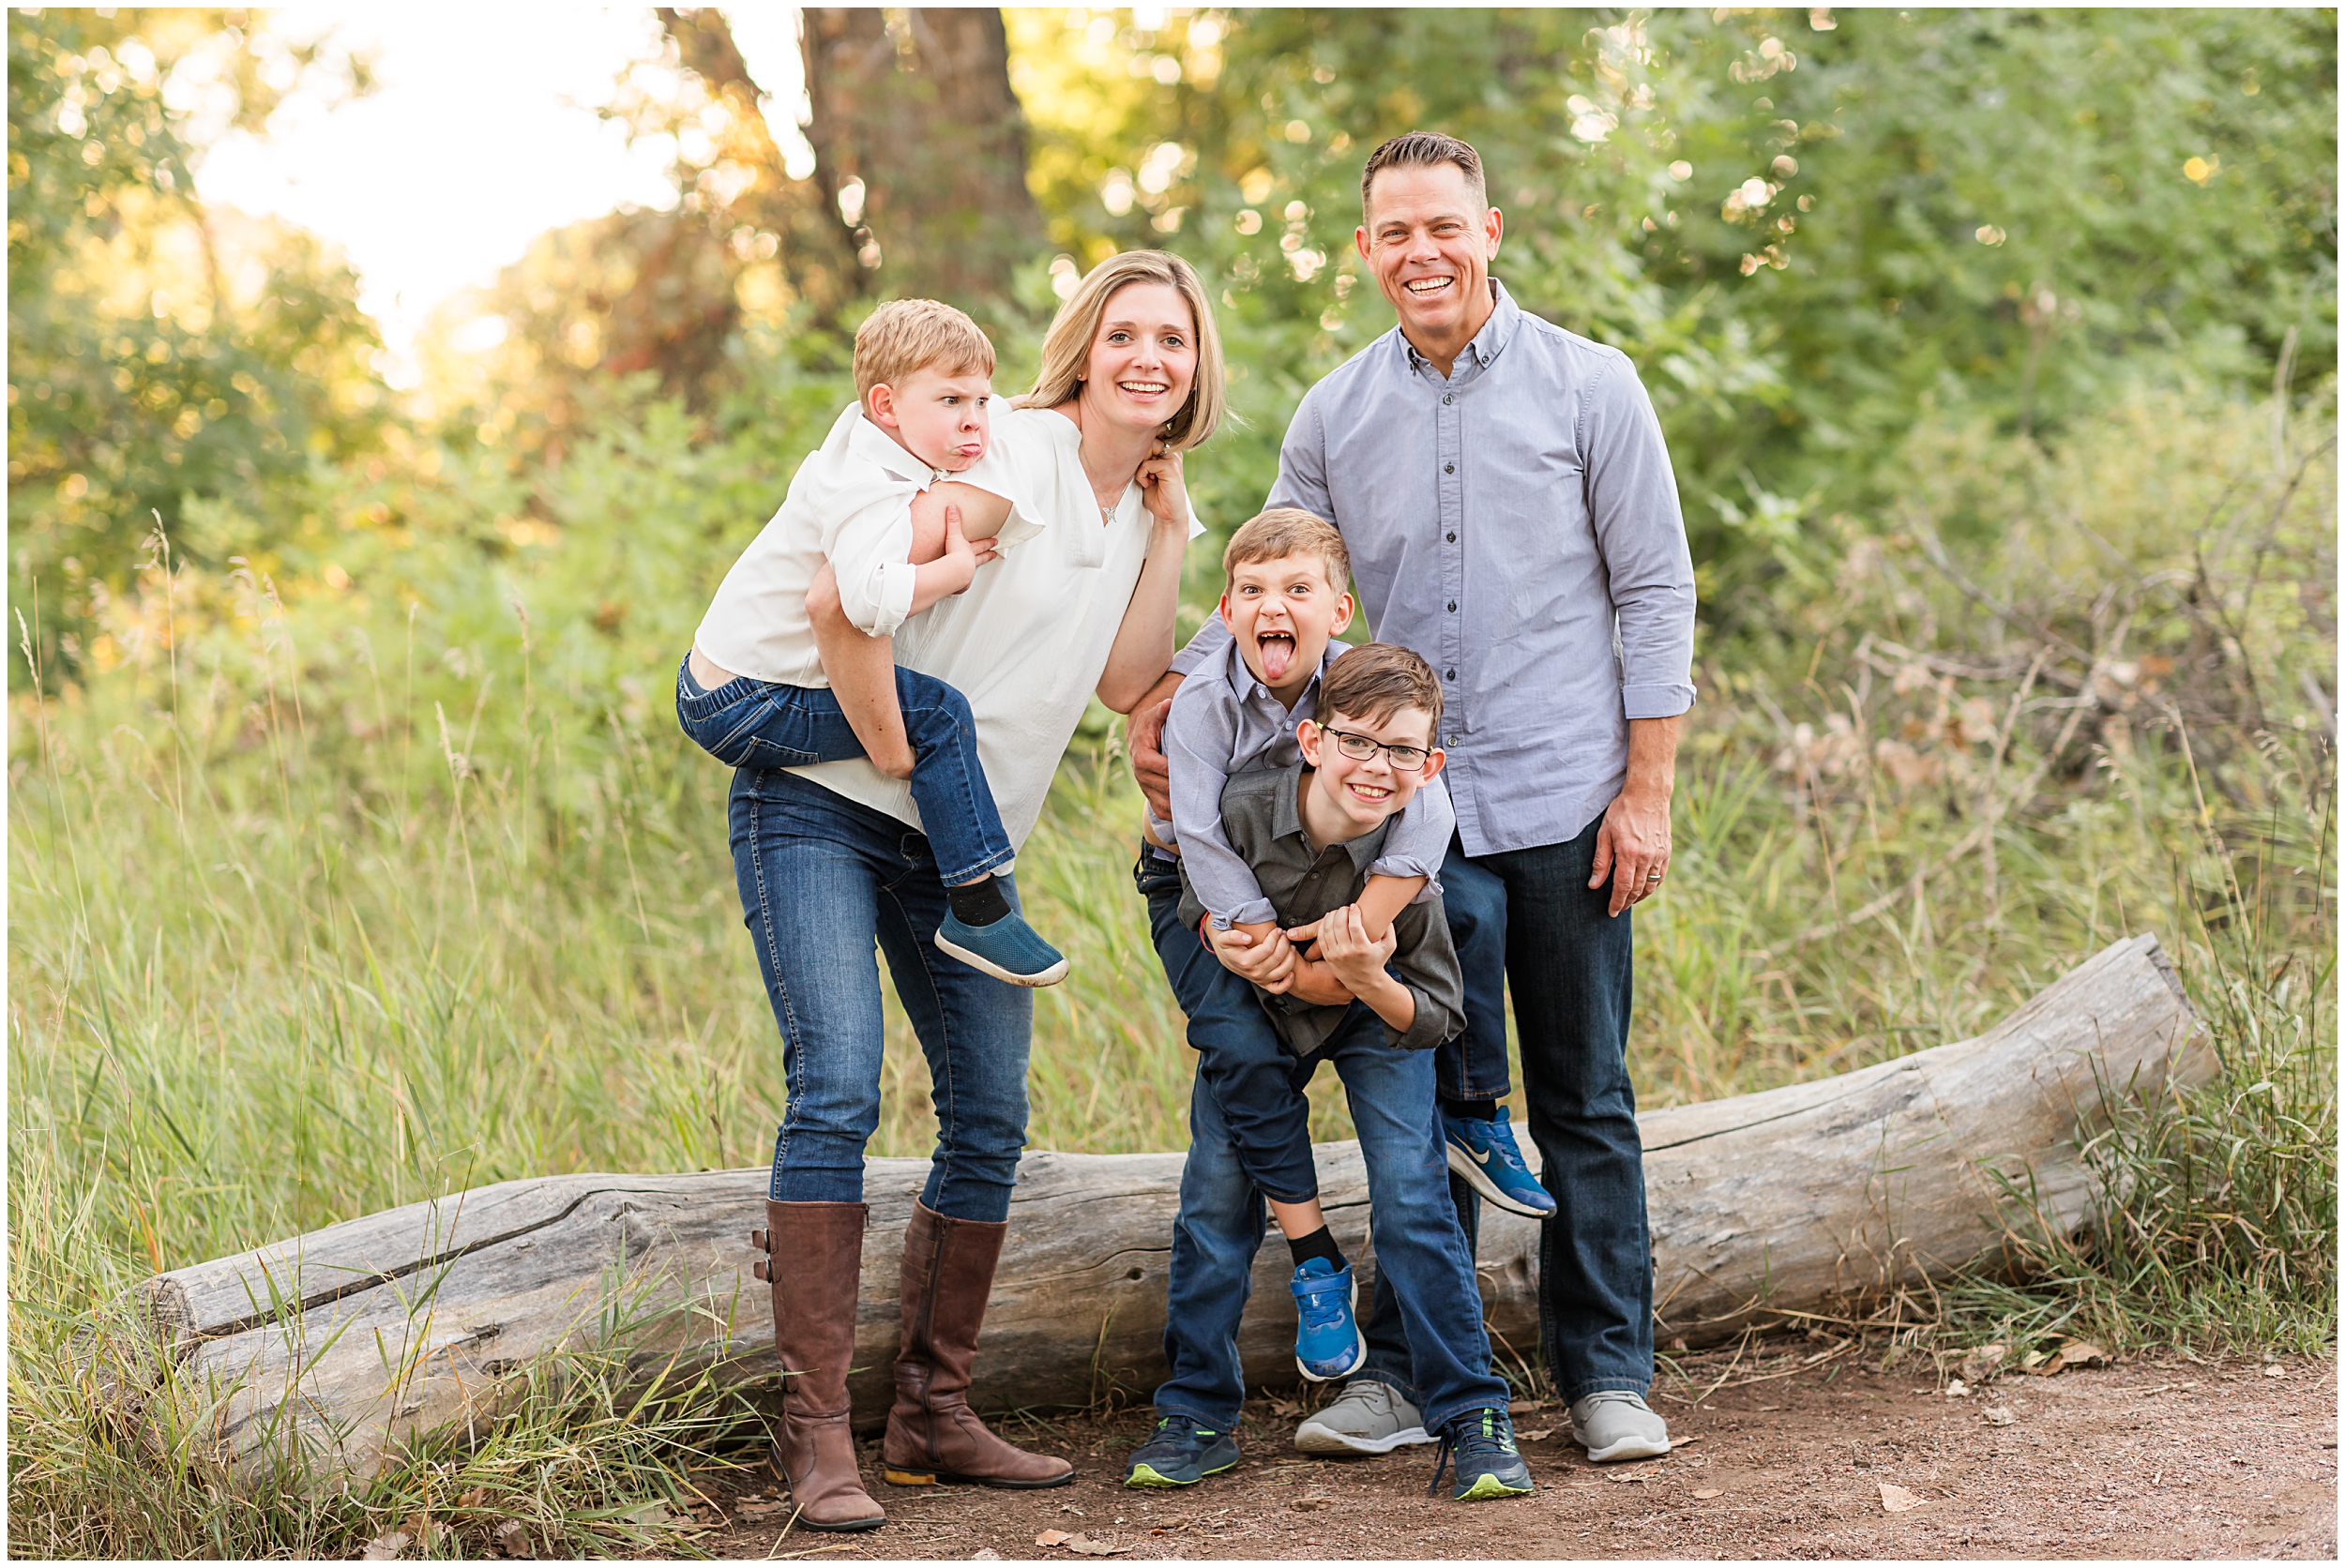 Family of five at McKay Lake, taken by Erie family photographer Theresa Pelser during their mini family session